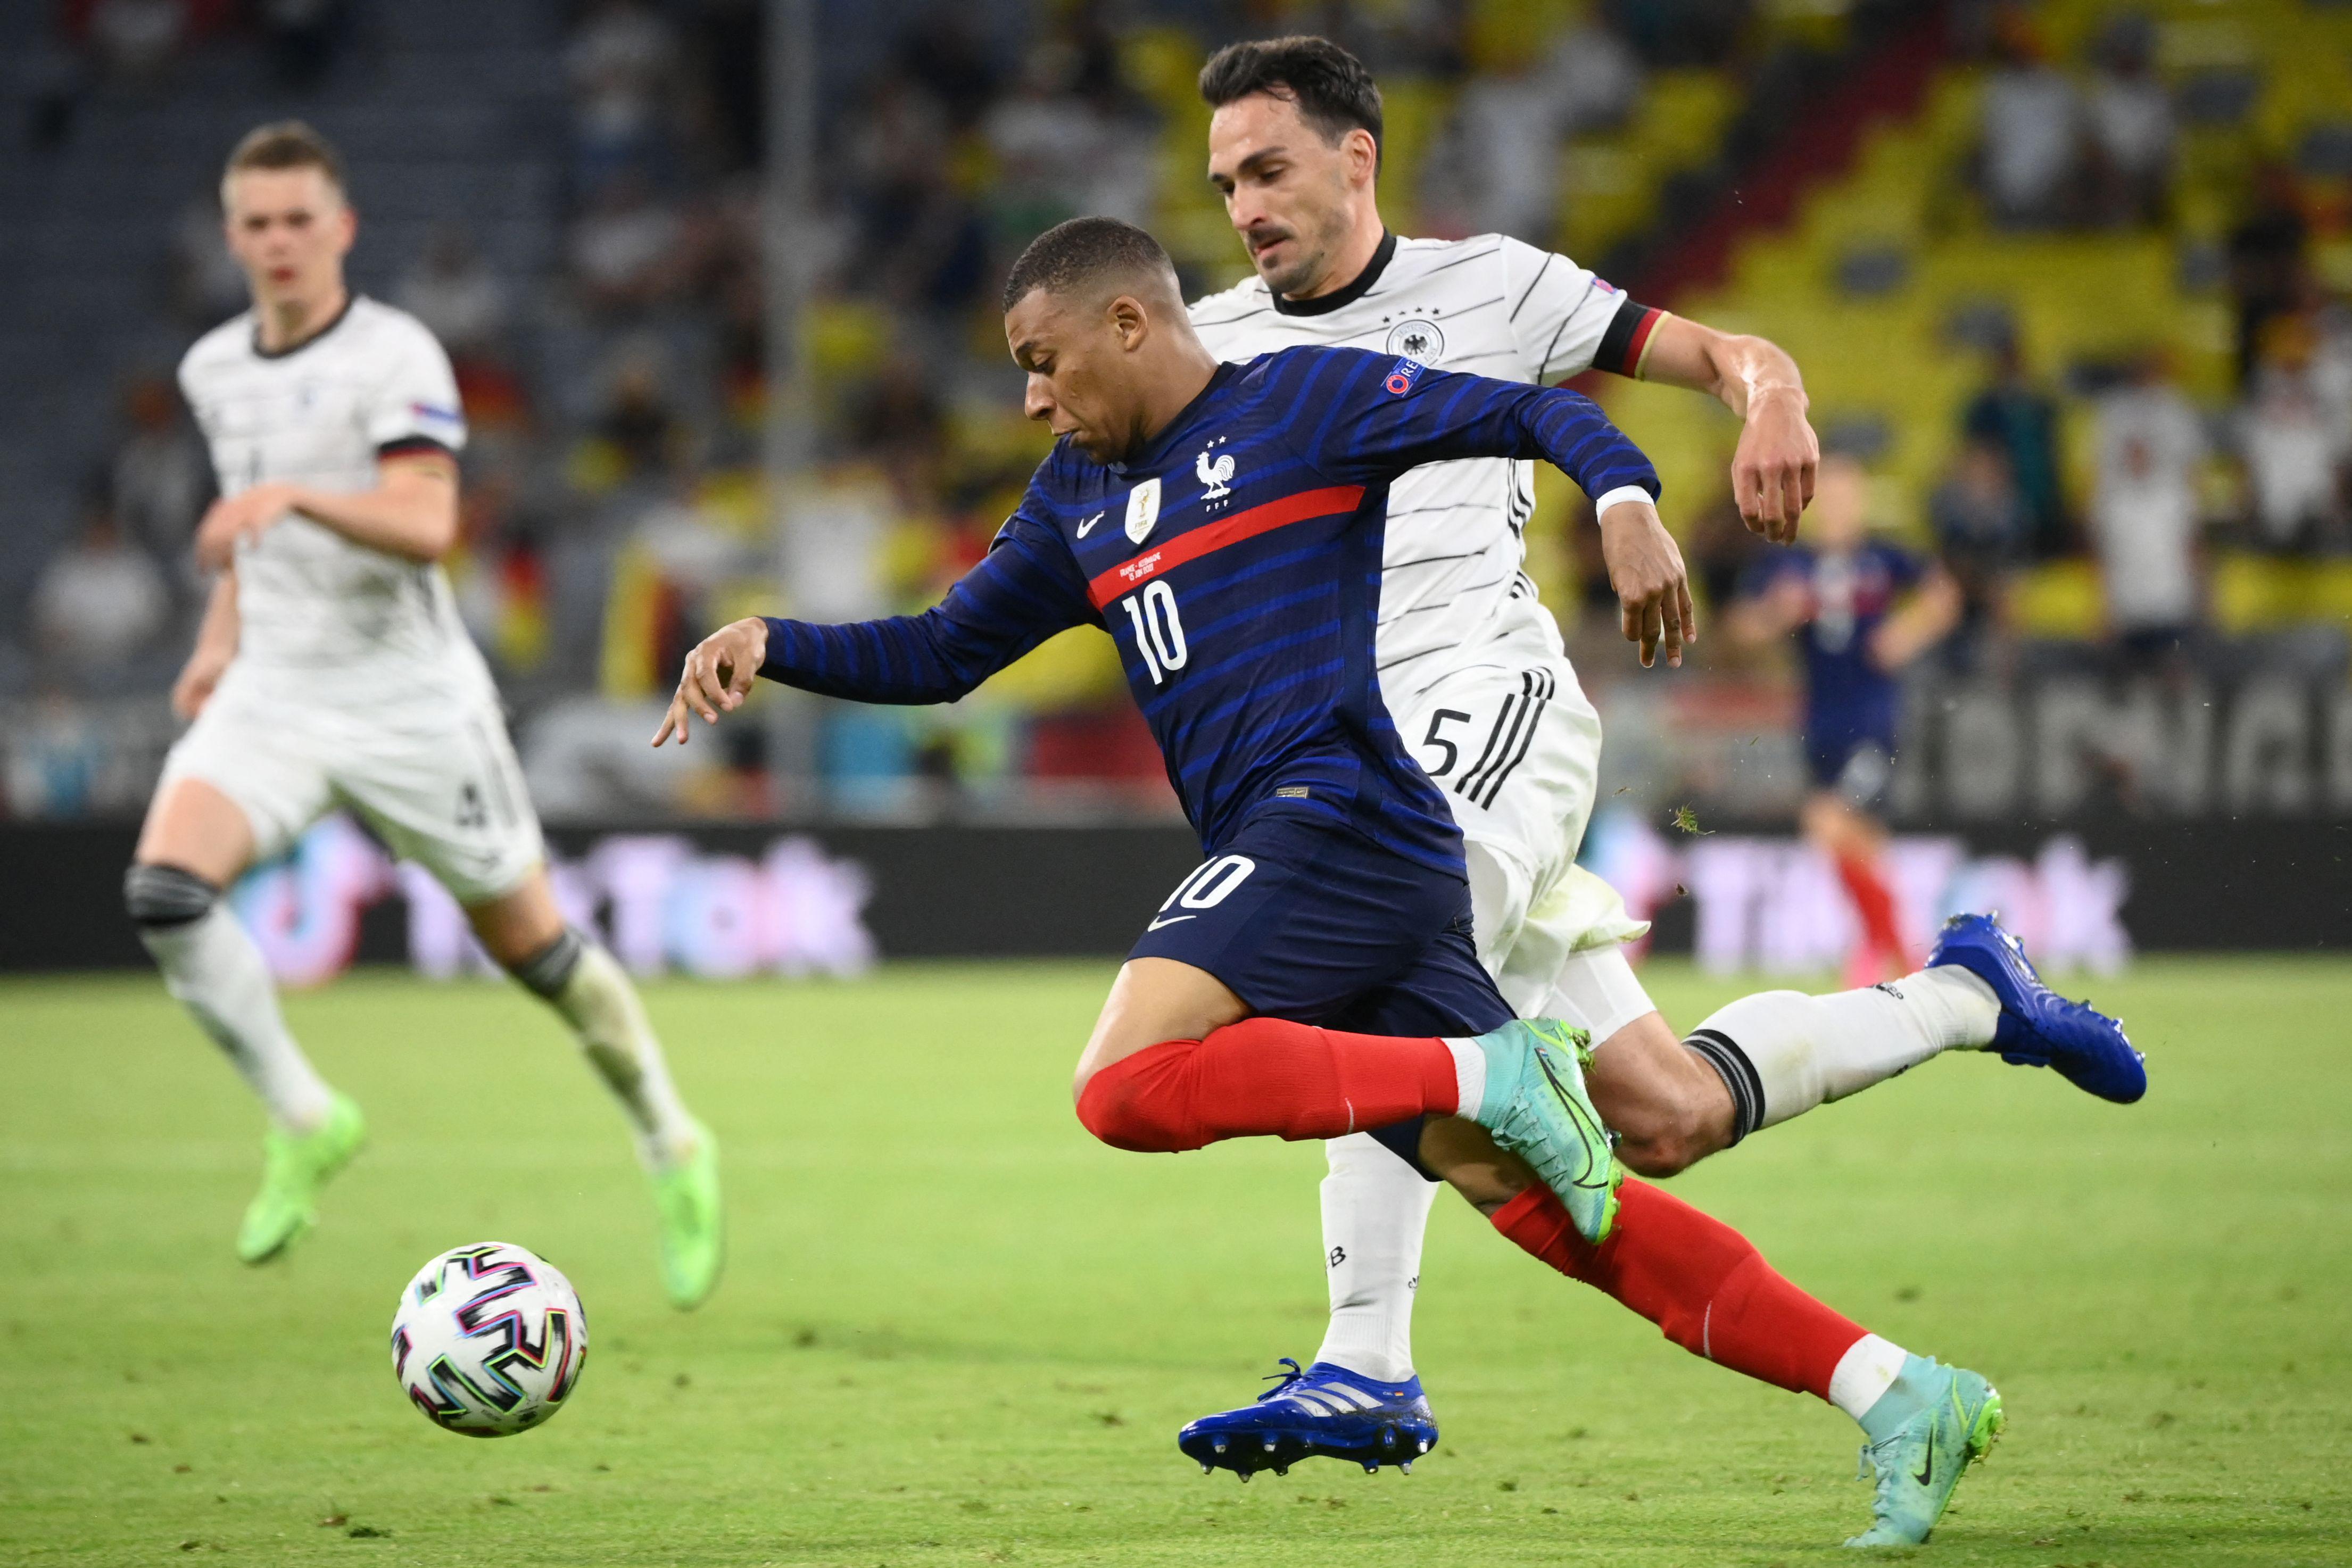 Kylian Mbappe chases the ball on the pitch against Germany, Mats Hummels chasing next to him, with another German player watching in the background